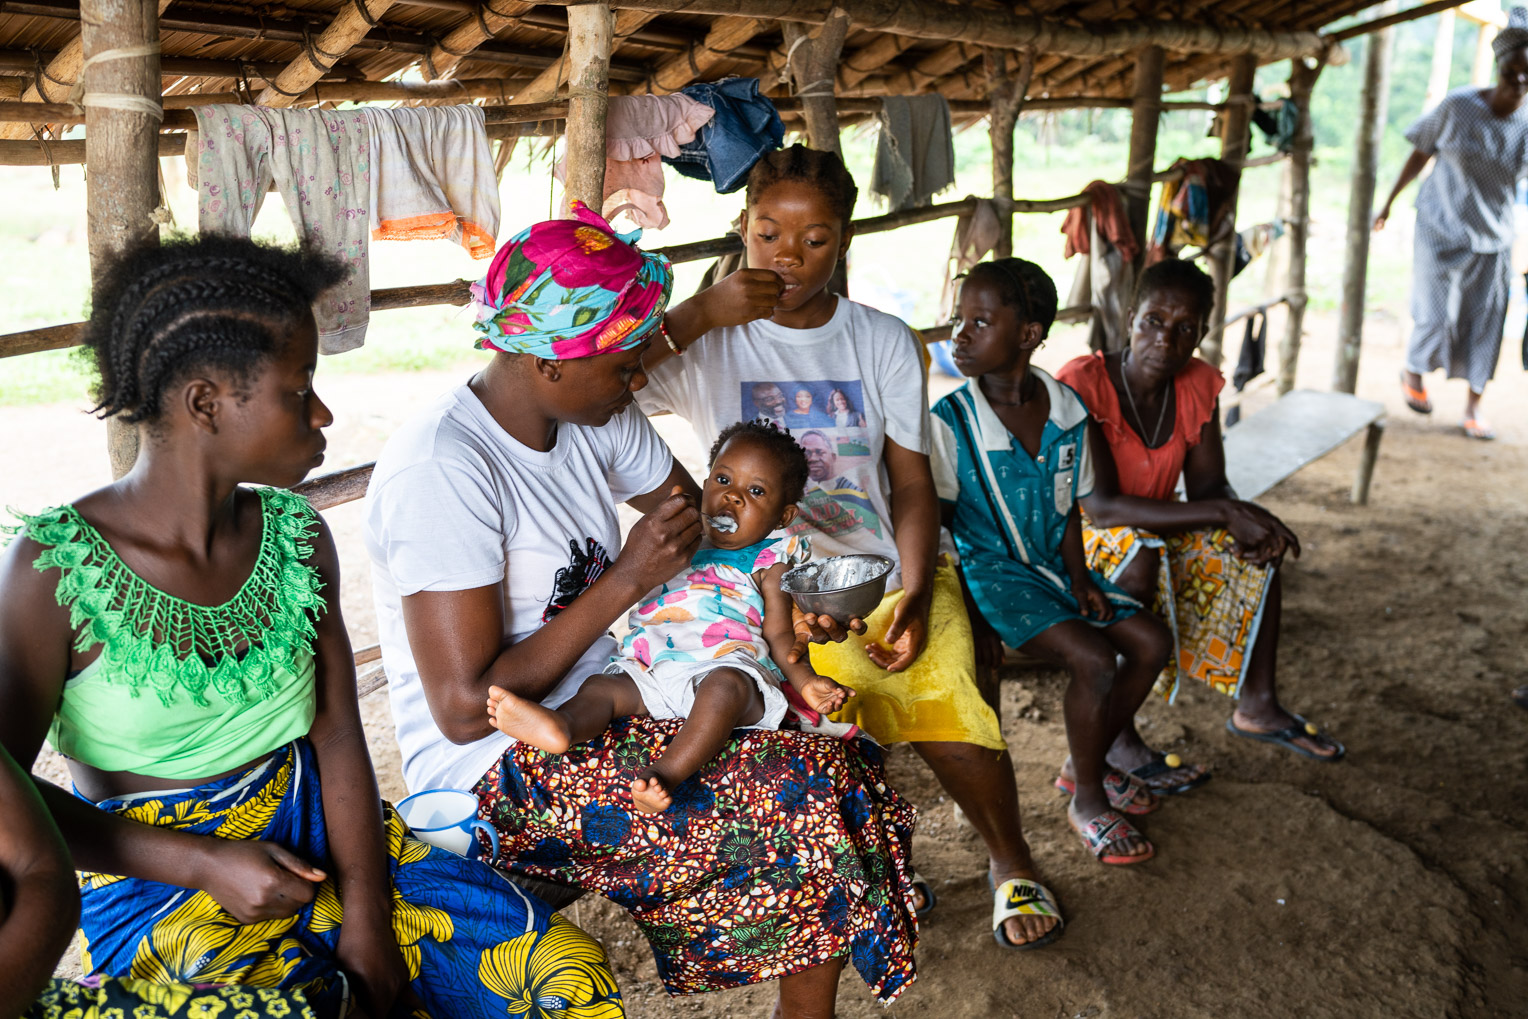 Childhood nutrition is of vital importance to families in rural areas of Liberia.